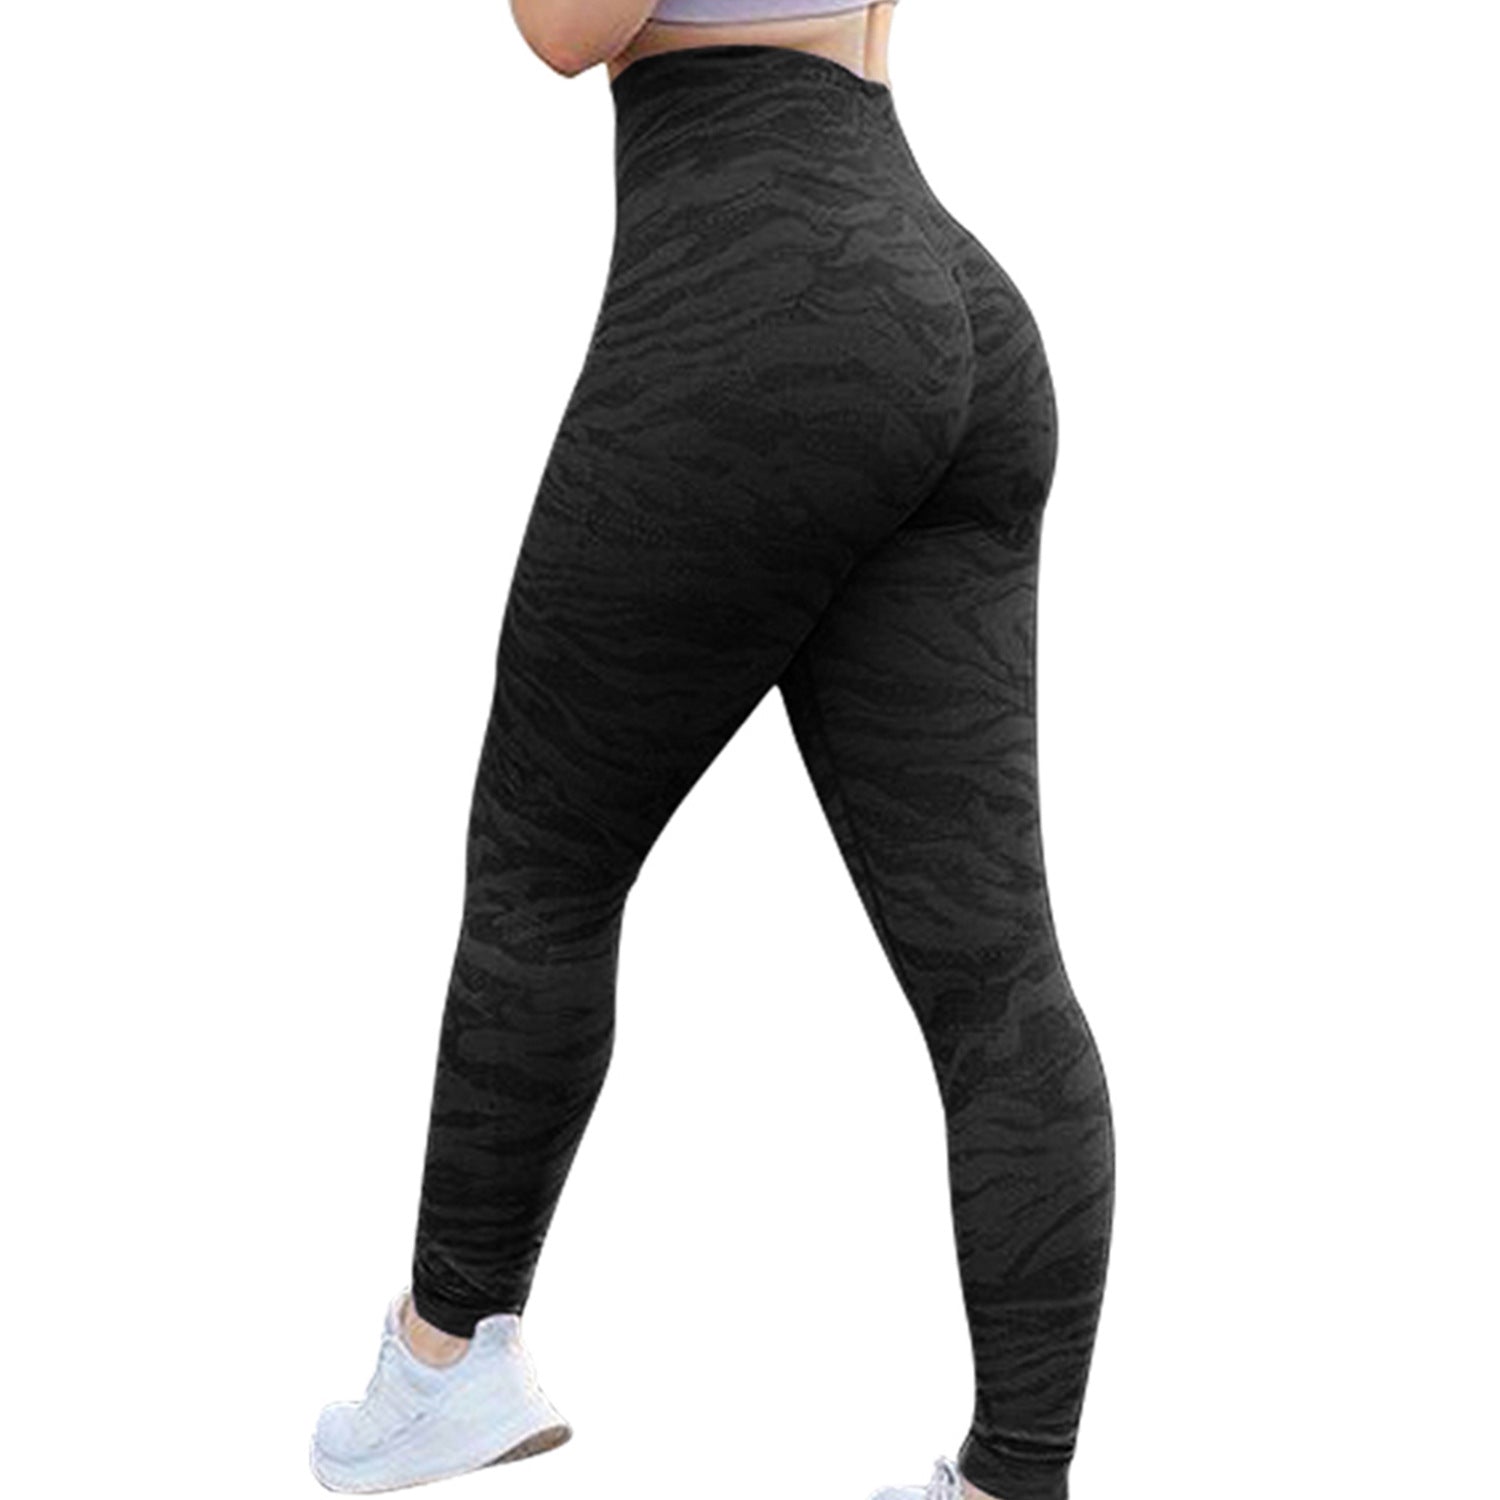 Butt Leggings For Women Push Up Booty Legging Workout Gym Tights Fitness Yoga Pants